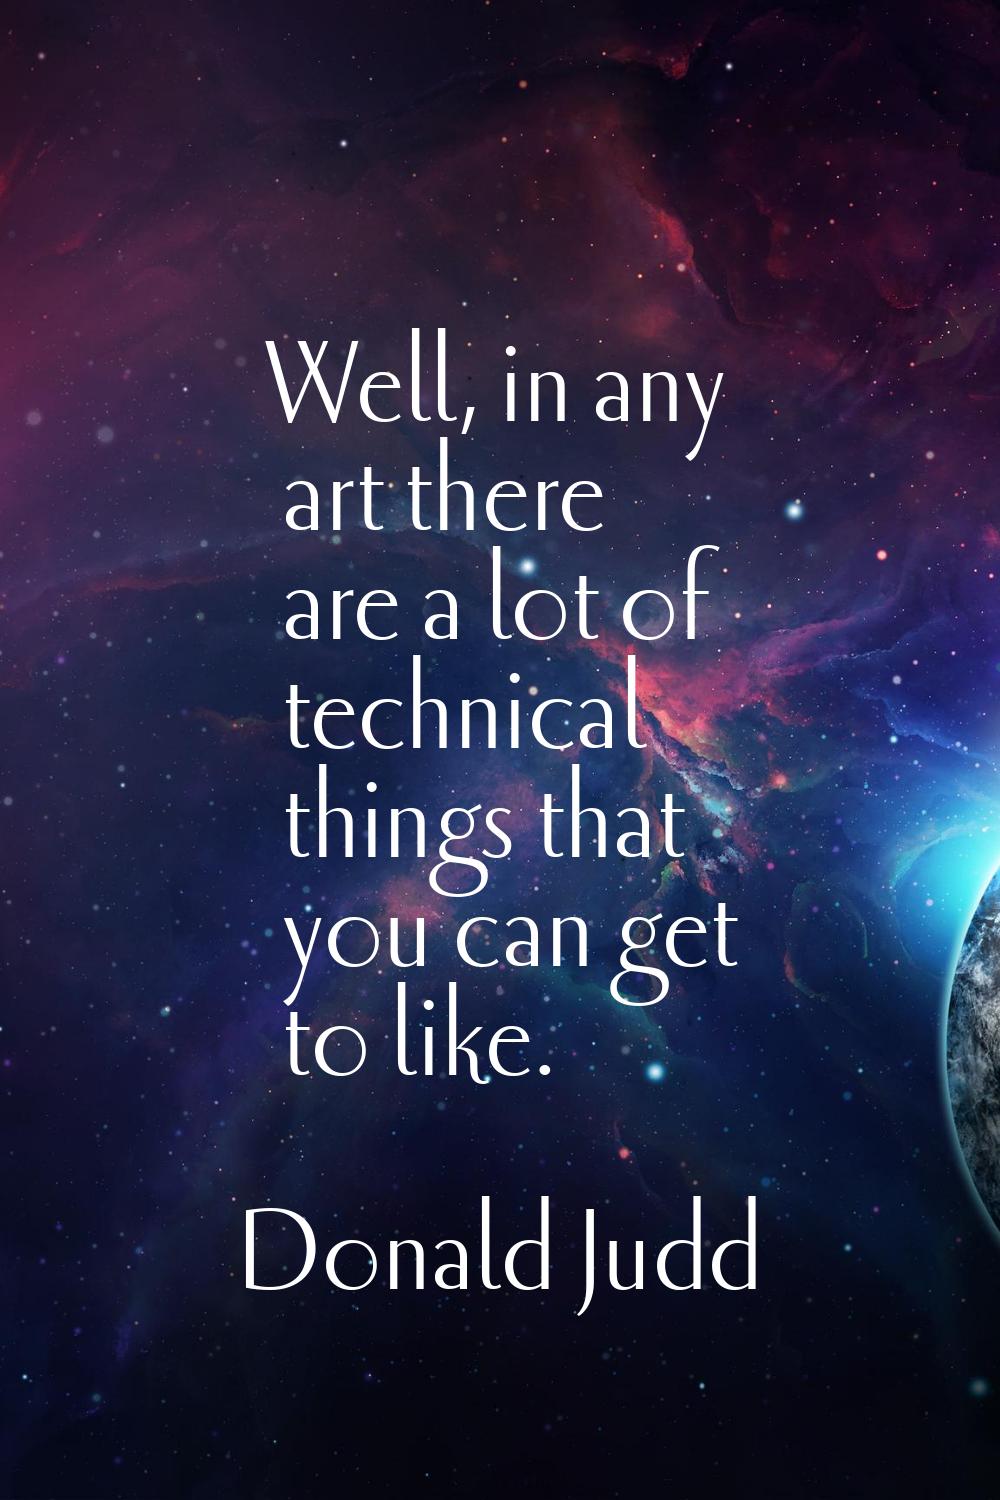 Well, in any art there are a lot of technical things that you can get to like.